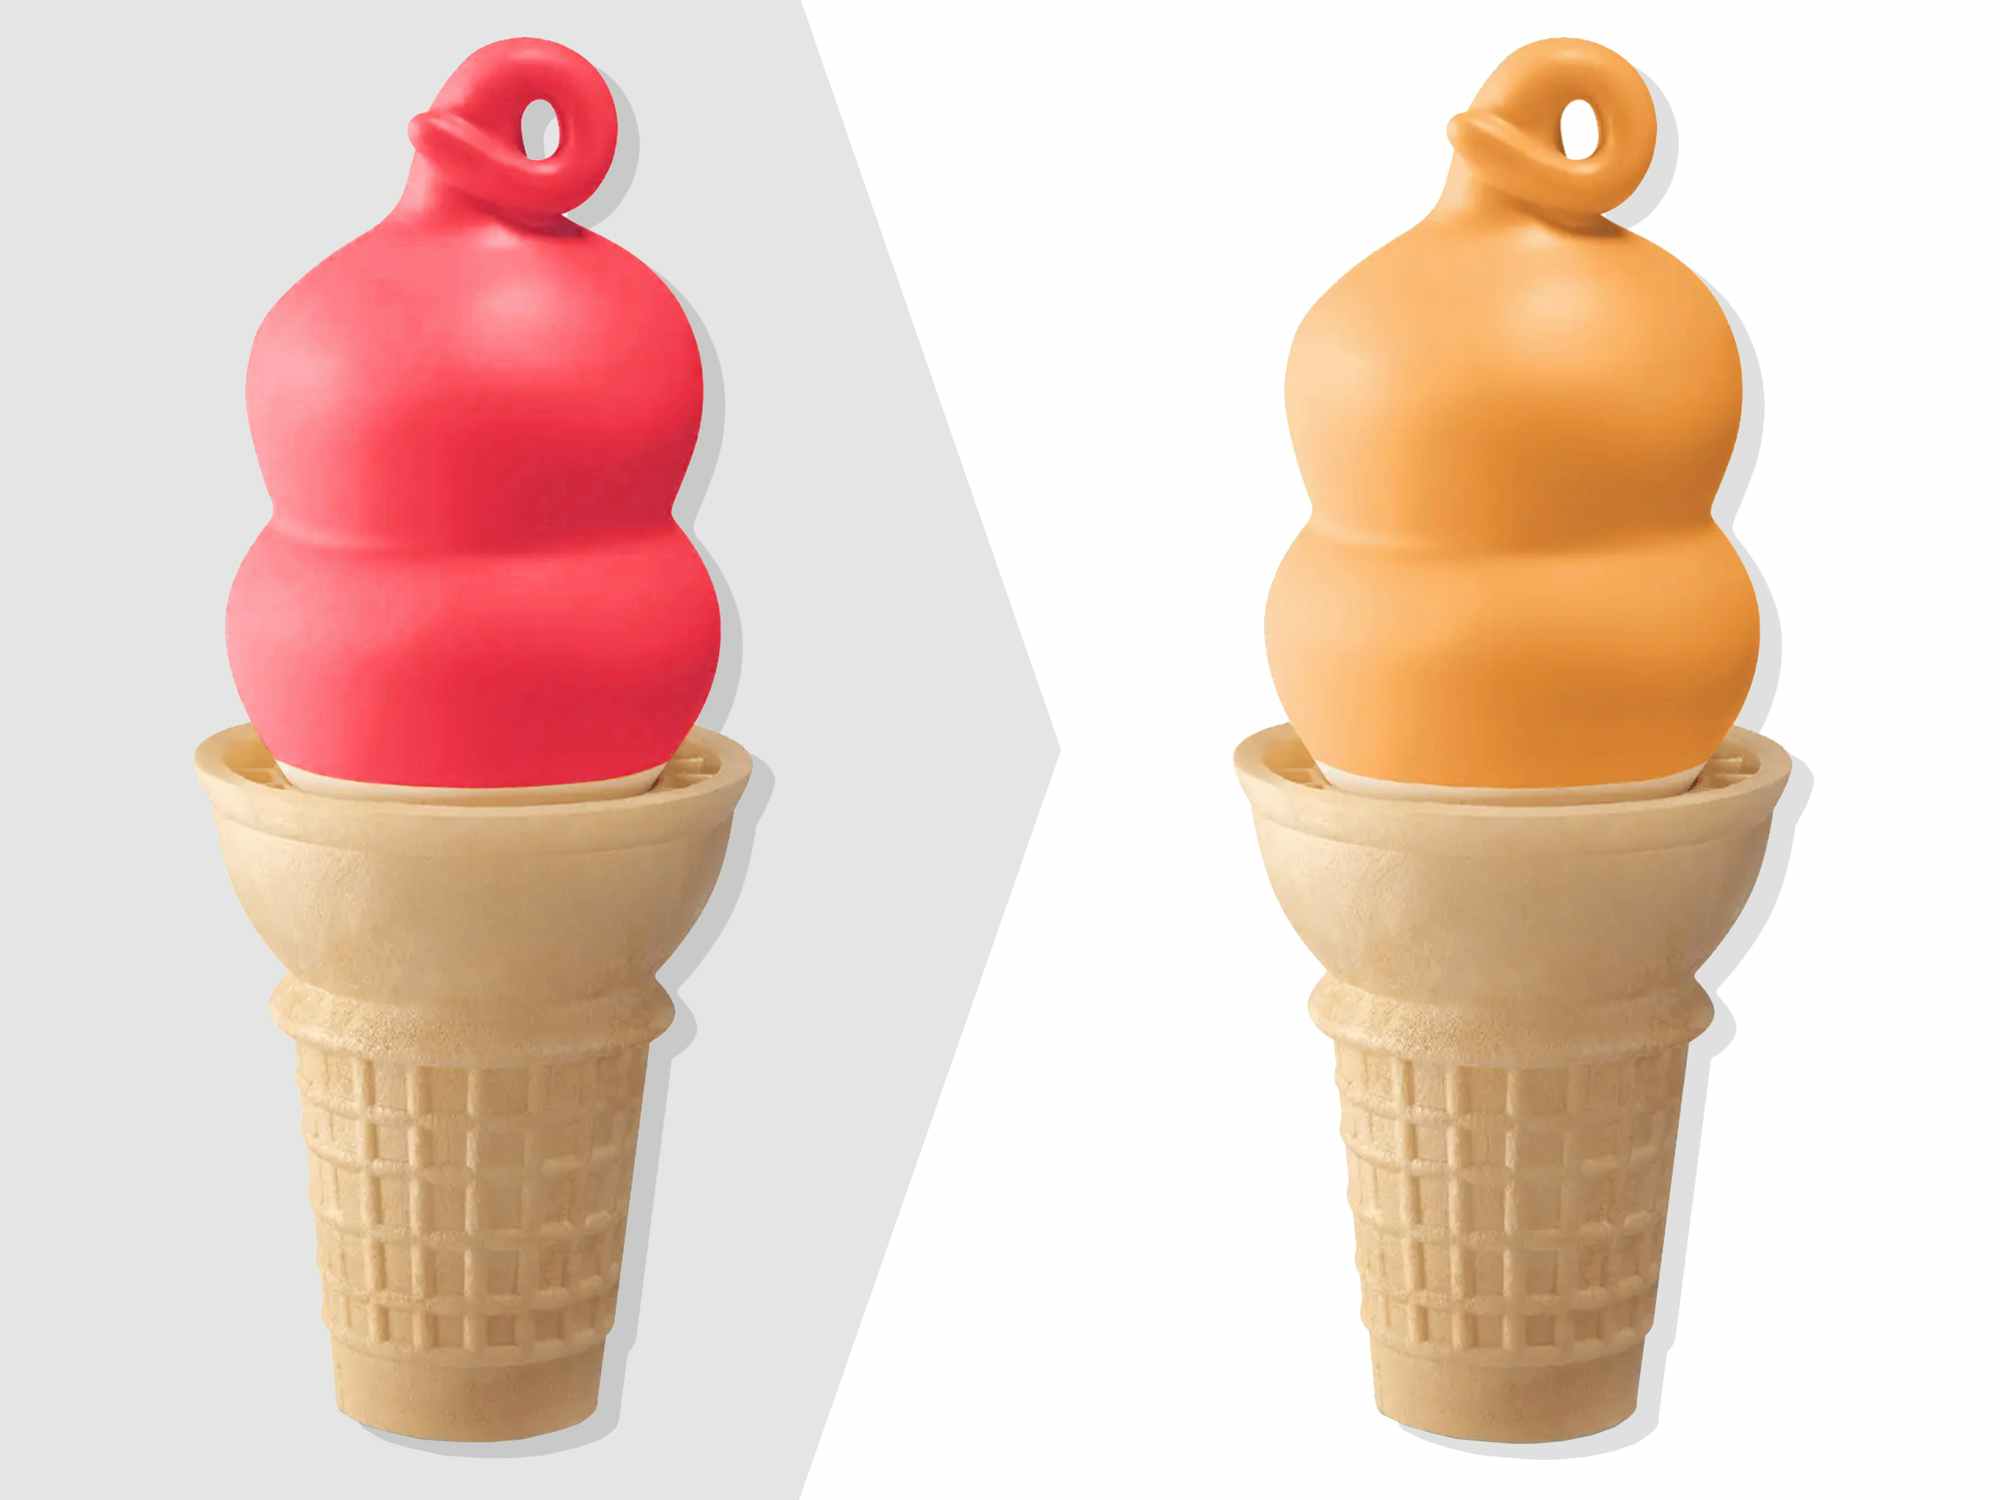 discontinued cherry dipped cone from dairy queen and its butterscotch dipped cone replacement